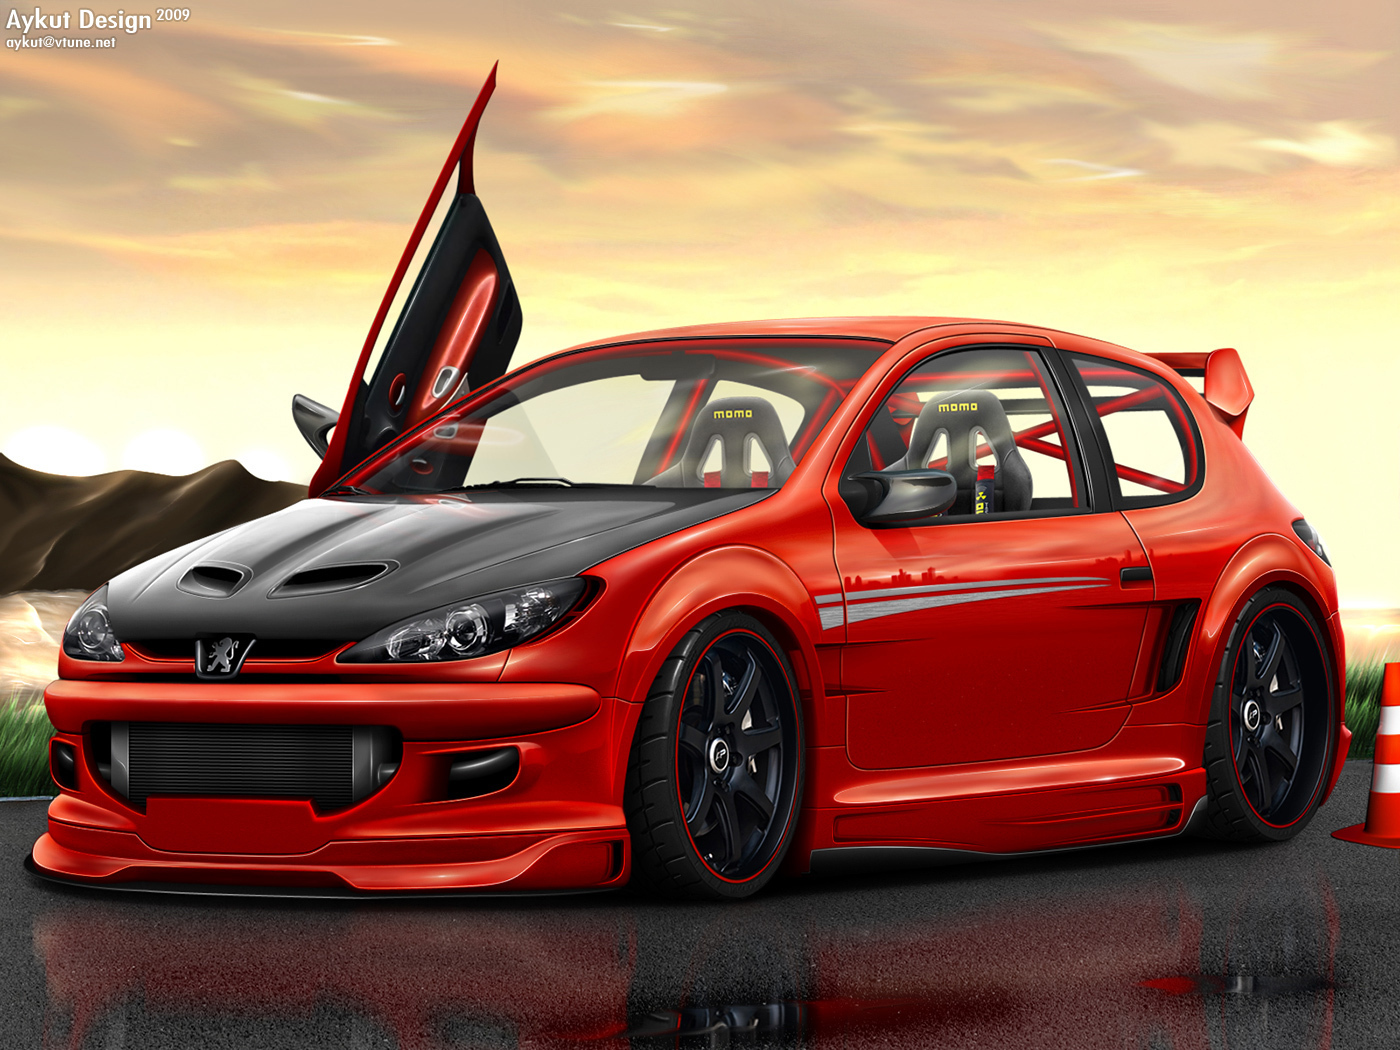 Peugeot Image Tuning HD Wallpaper And Background Photos